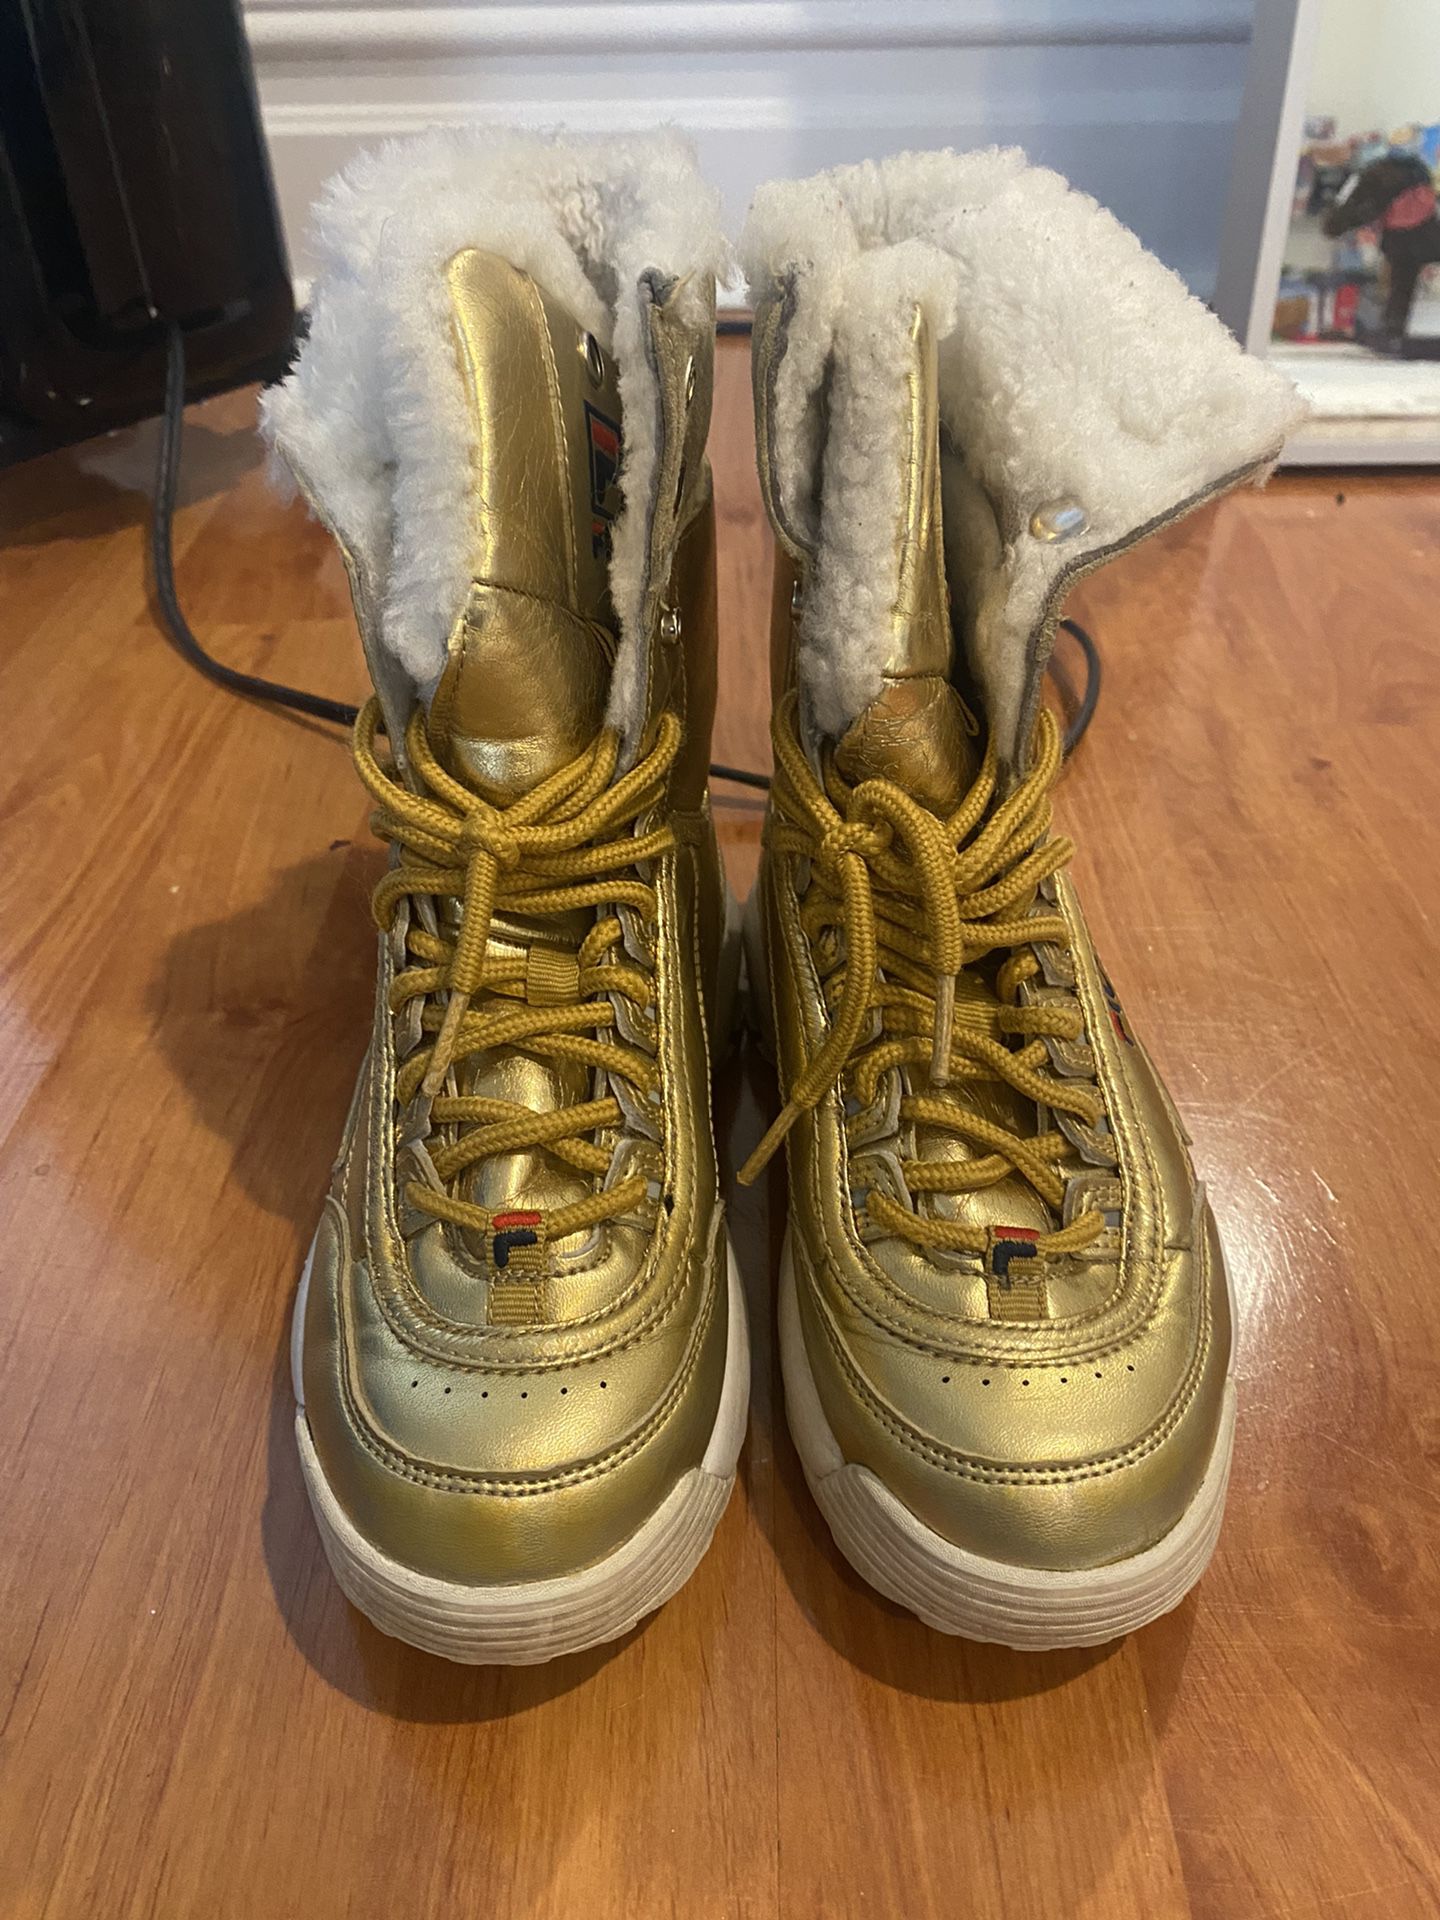 Fila Girls Disruptor Shearling Fur Lined Winter Boots Fold Over Gold Size 2. Used Condition. Make an offer!